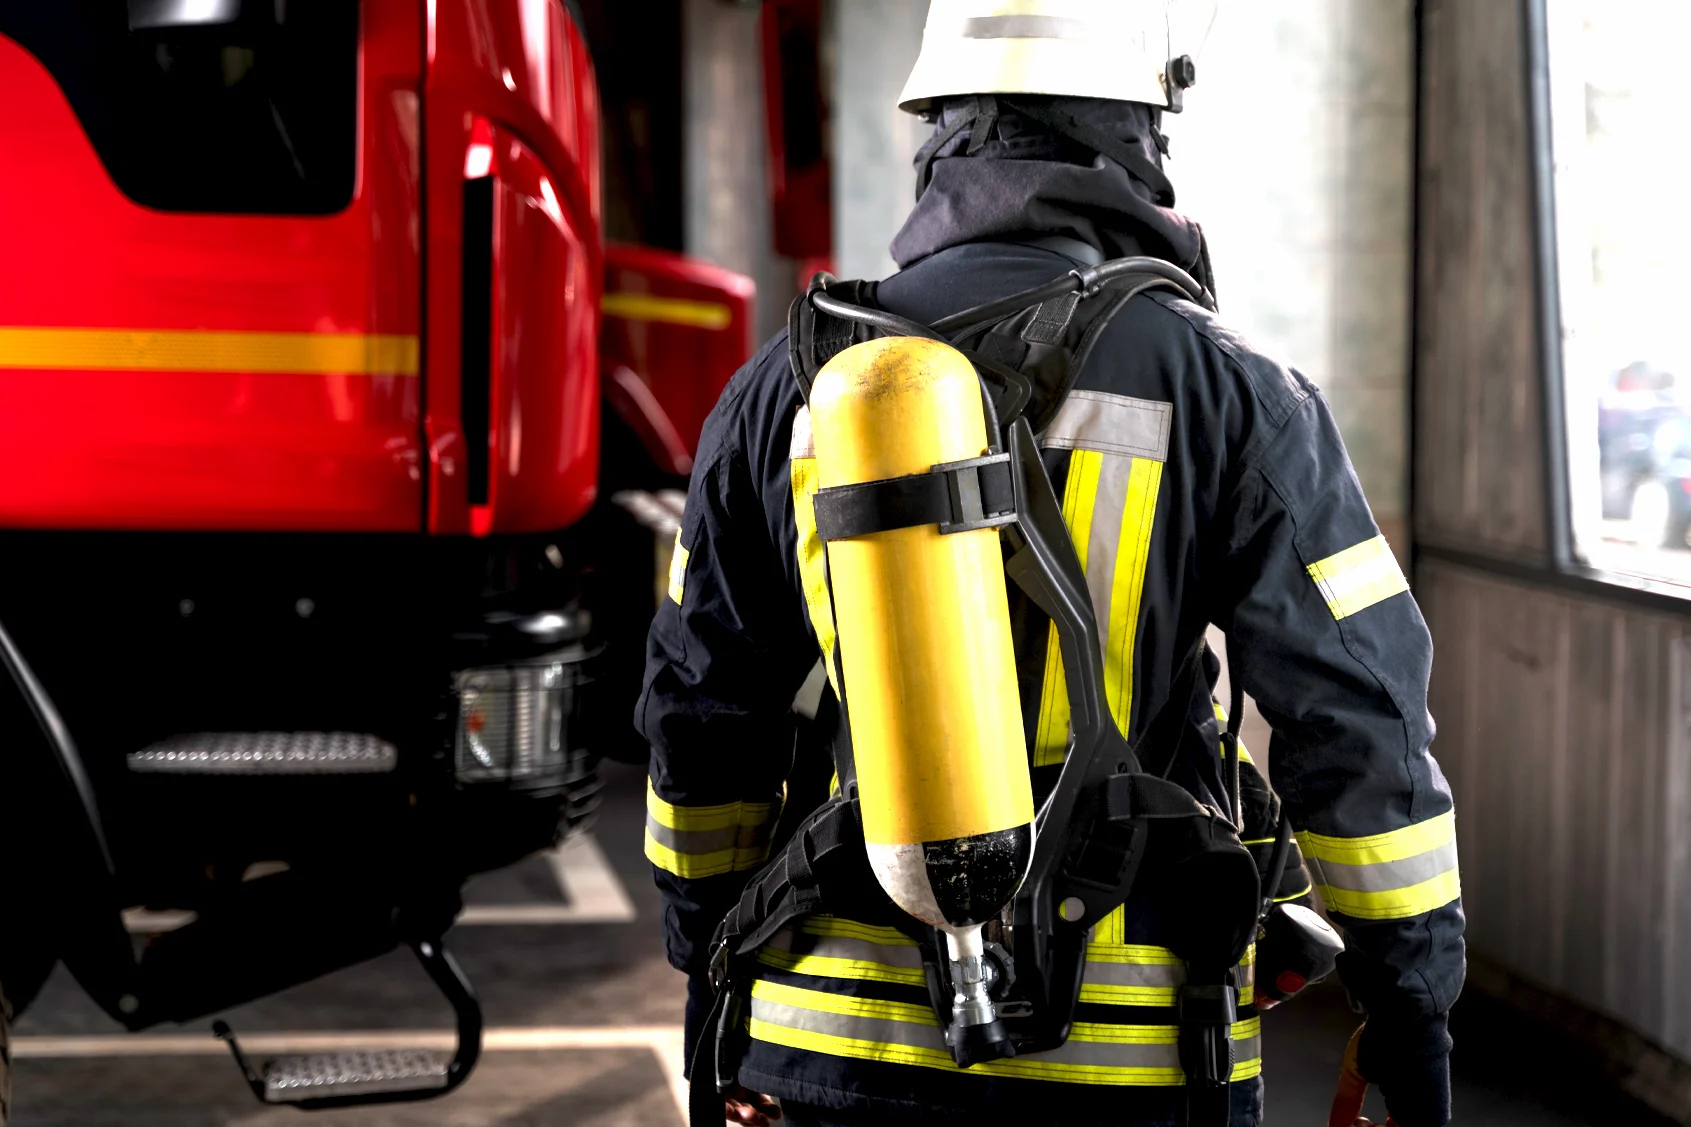 Occupational Safety & Firefighting course